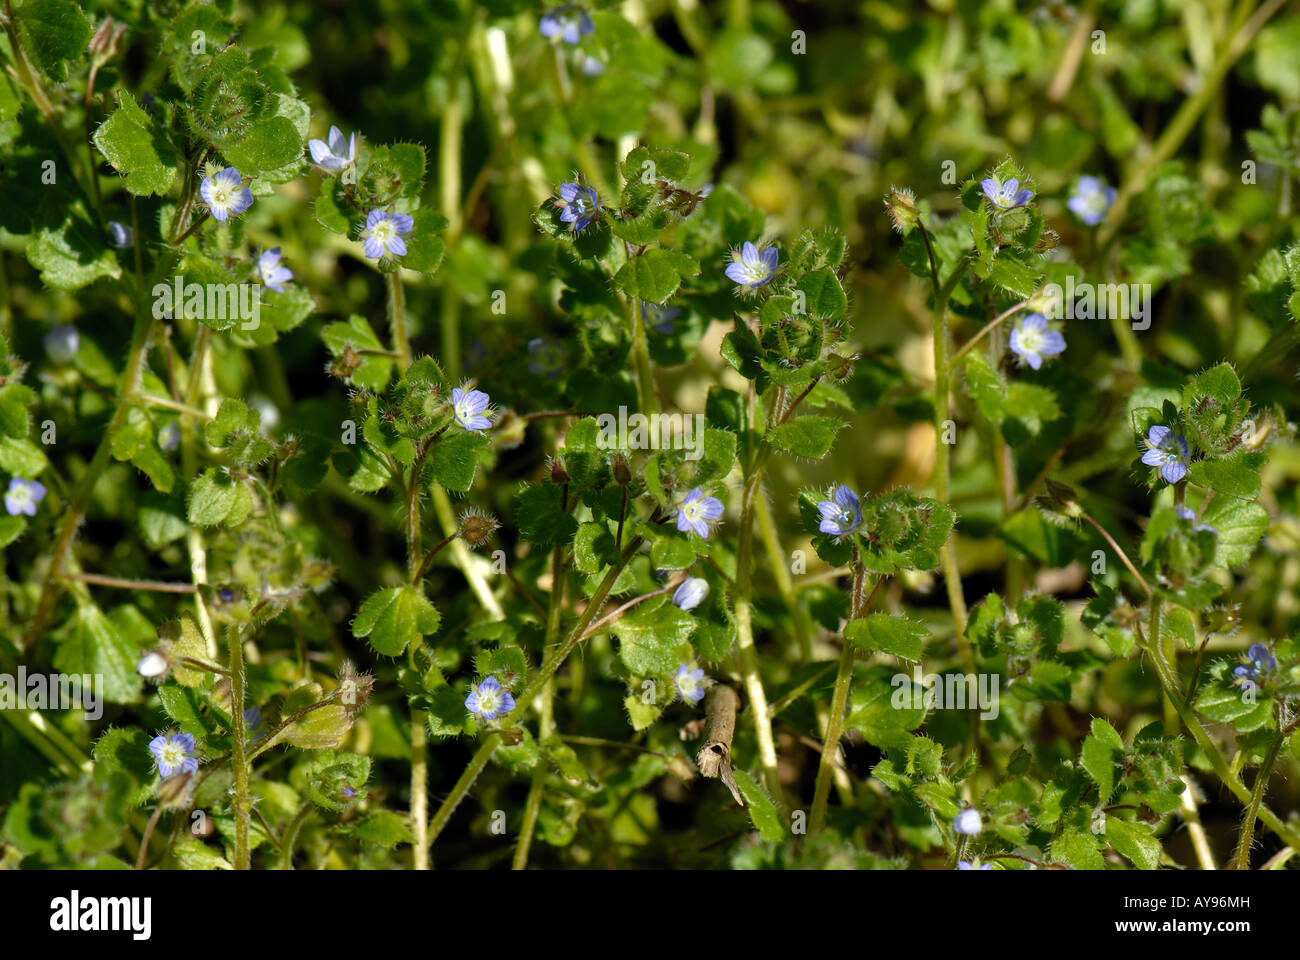 Blue ivy leaved speedwell Veronica hederifolia ssp hederifolia flowering plant Stock Photo